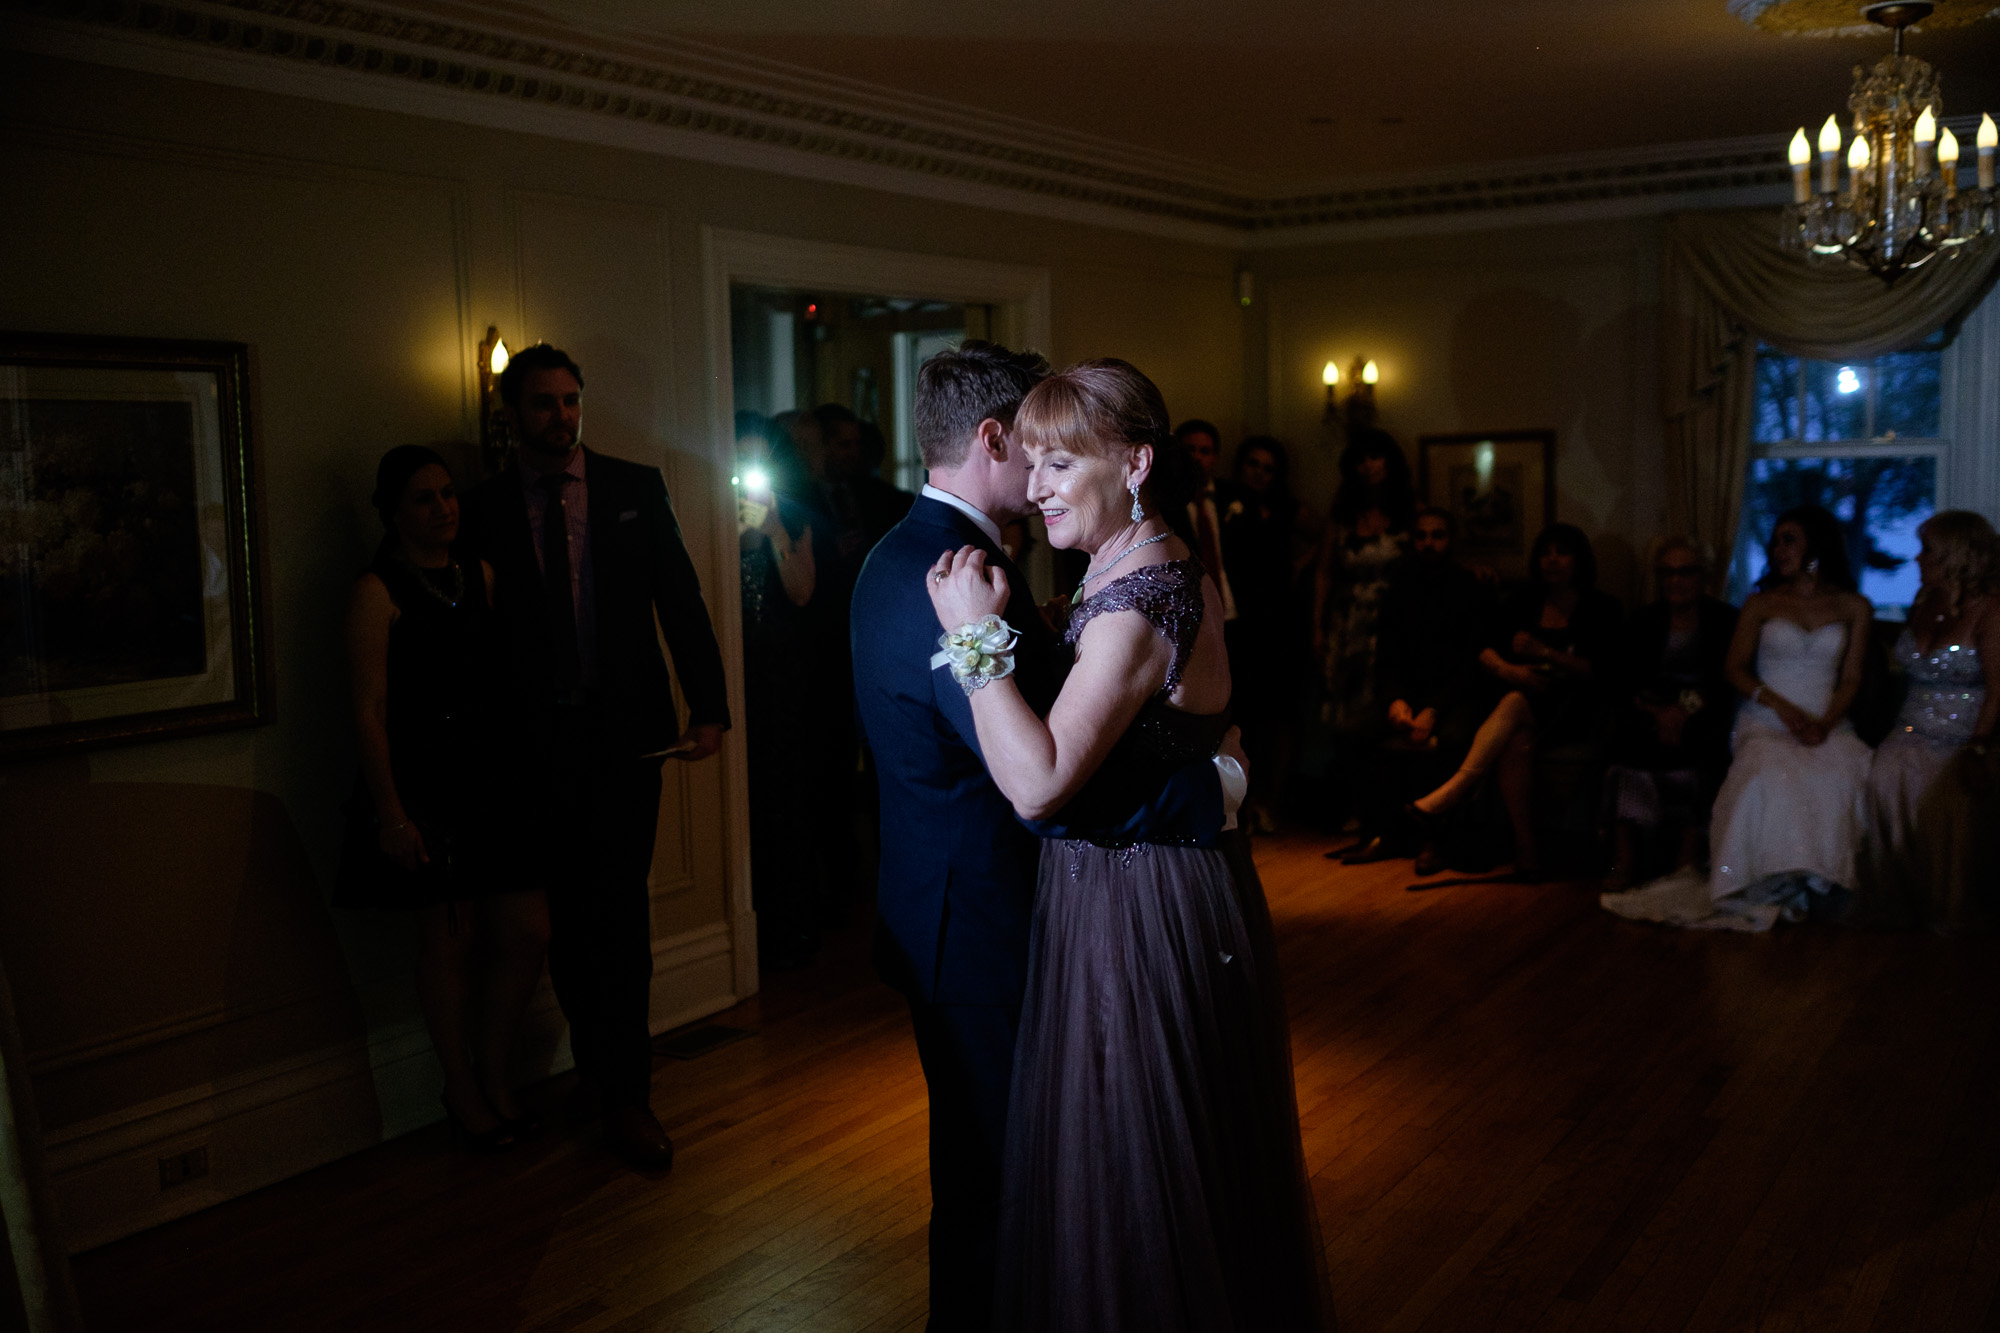  Chris dances with his mom during the wedding reception at the Paletta Mansion. 